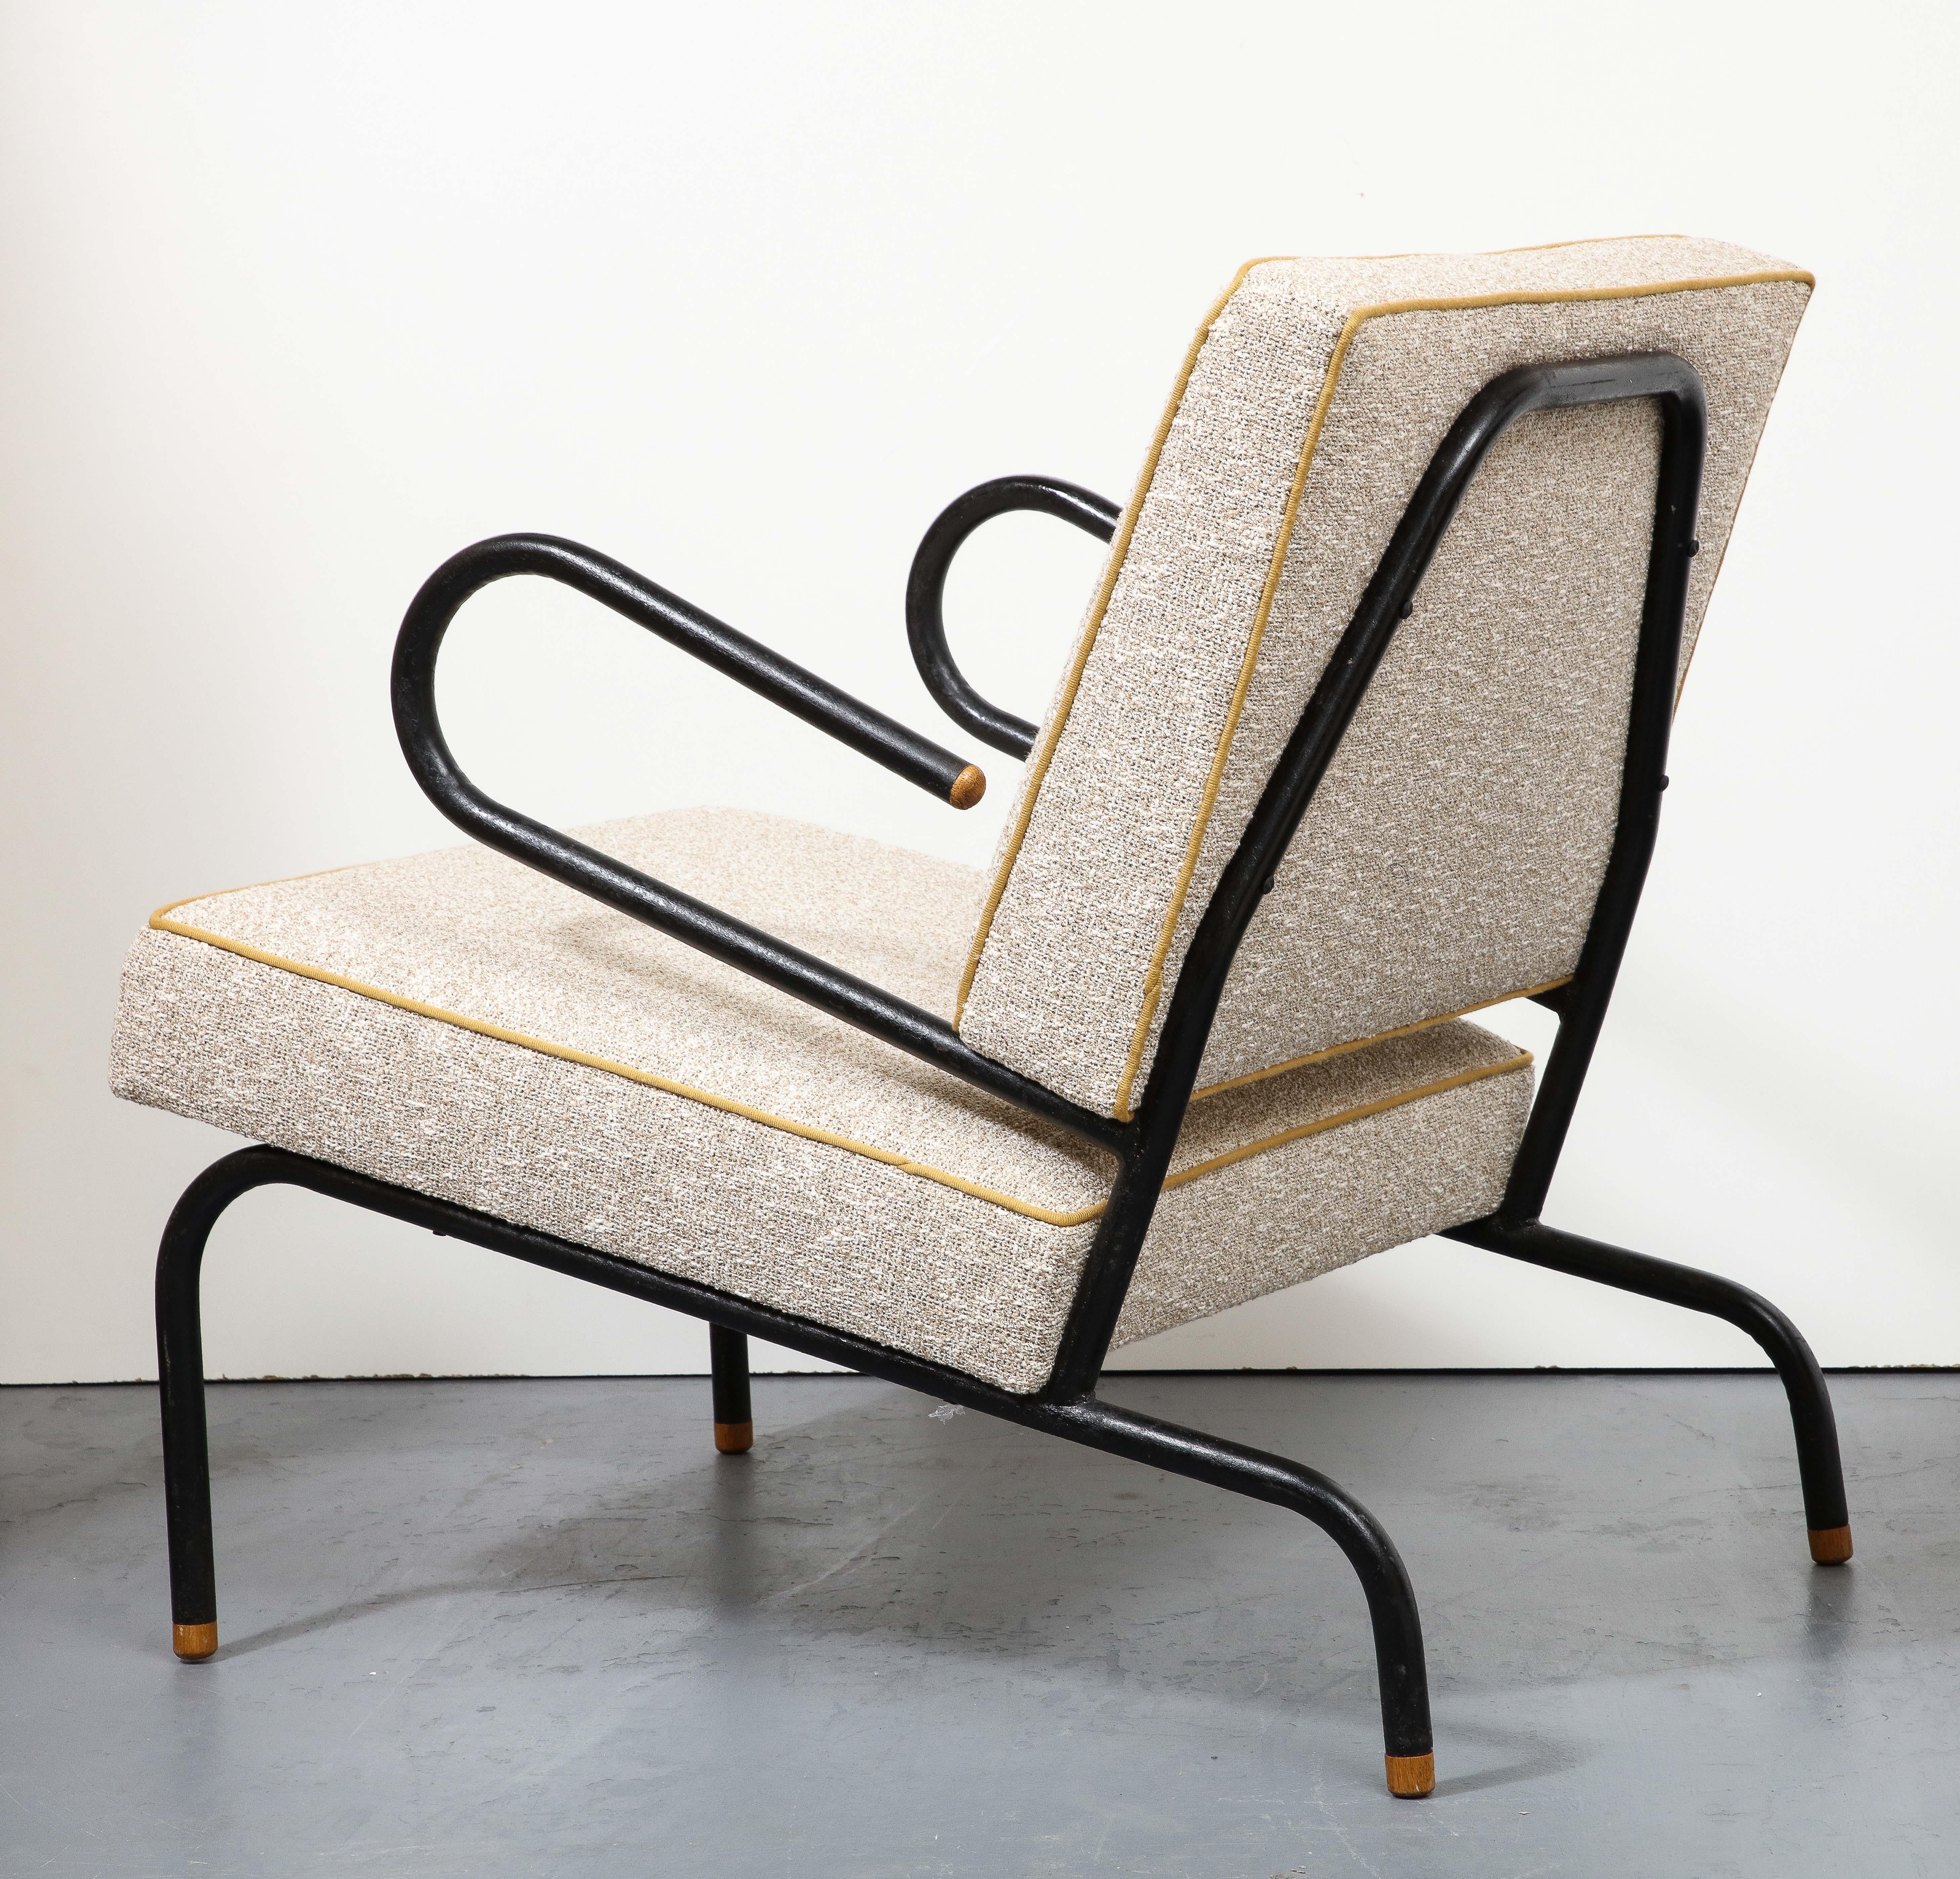 Bent Steel Lounge Chair by Jacques Hitier for Tubauto, France, c. 1955 For Sale 5